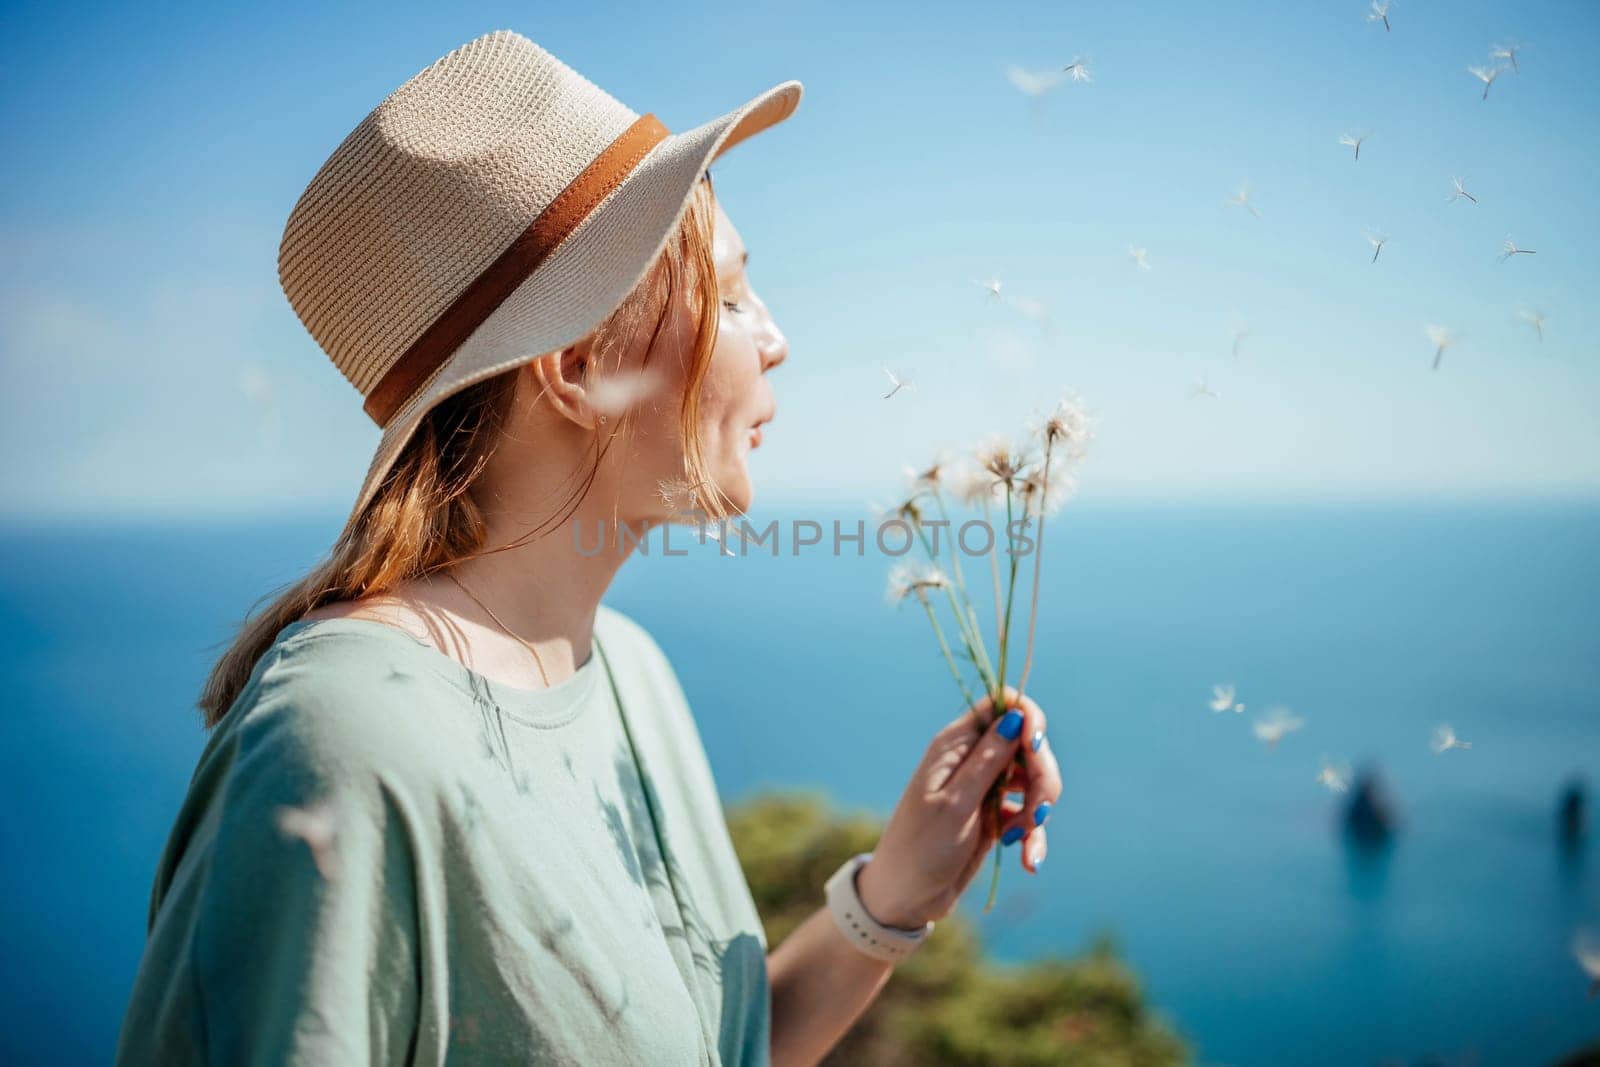 A woman wearing a straw hat is blowing on a bunch of dandelions. The scene is set on a beach with a blue ocean in the background. The woman is enjoying the moment and the beauty of the flowers. by Matiunina